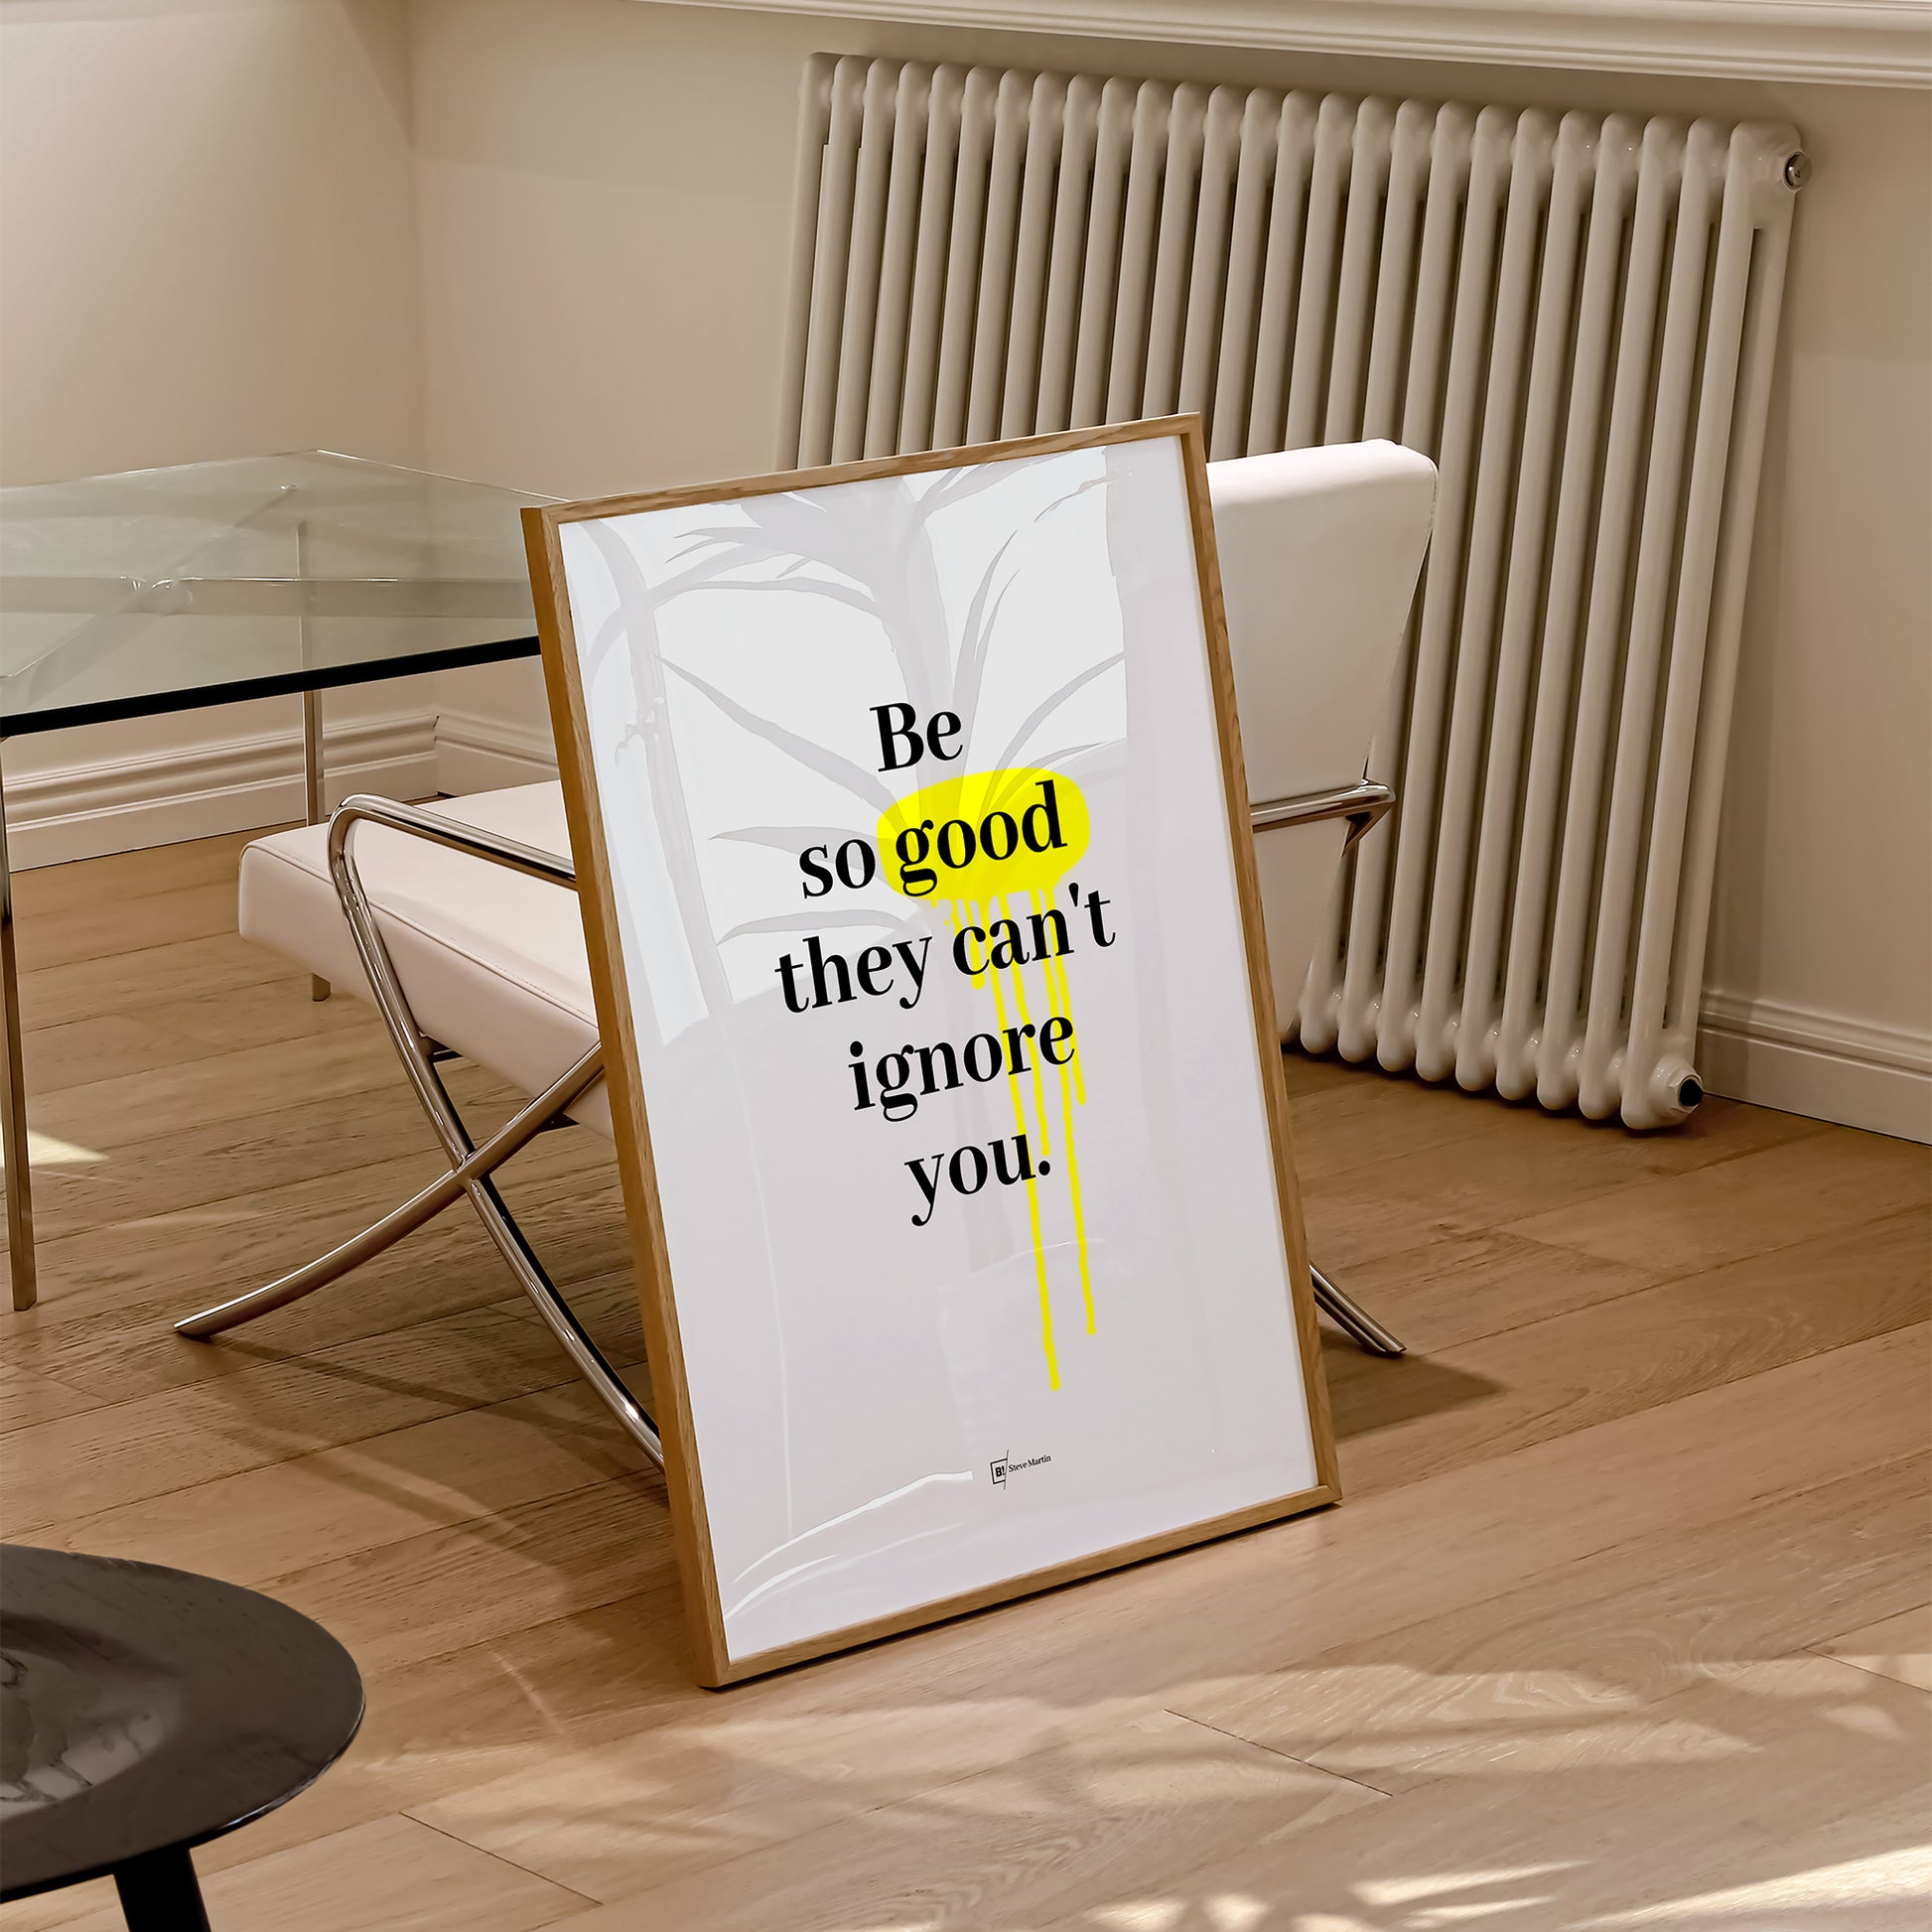 Be inspired by Steve Martin's famous "Be so good they can't ignore you" quote art print. This artwork was printed using the giclée process on archival acid-free paper and is presented in a natural oak frame that captures its timeless beauty in every detail.